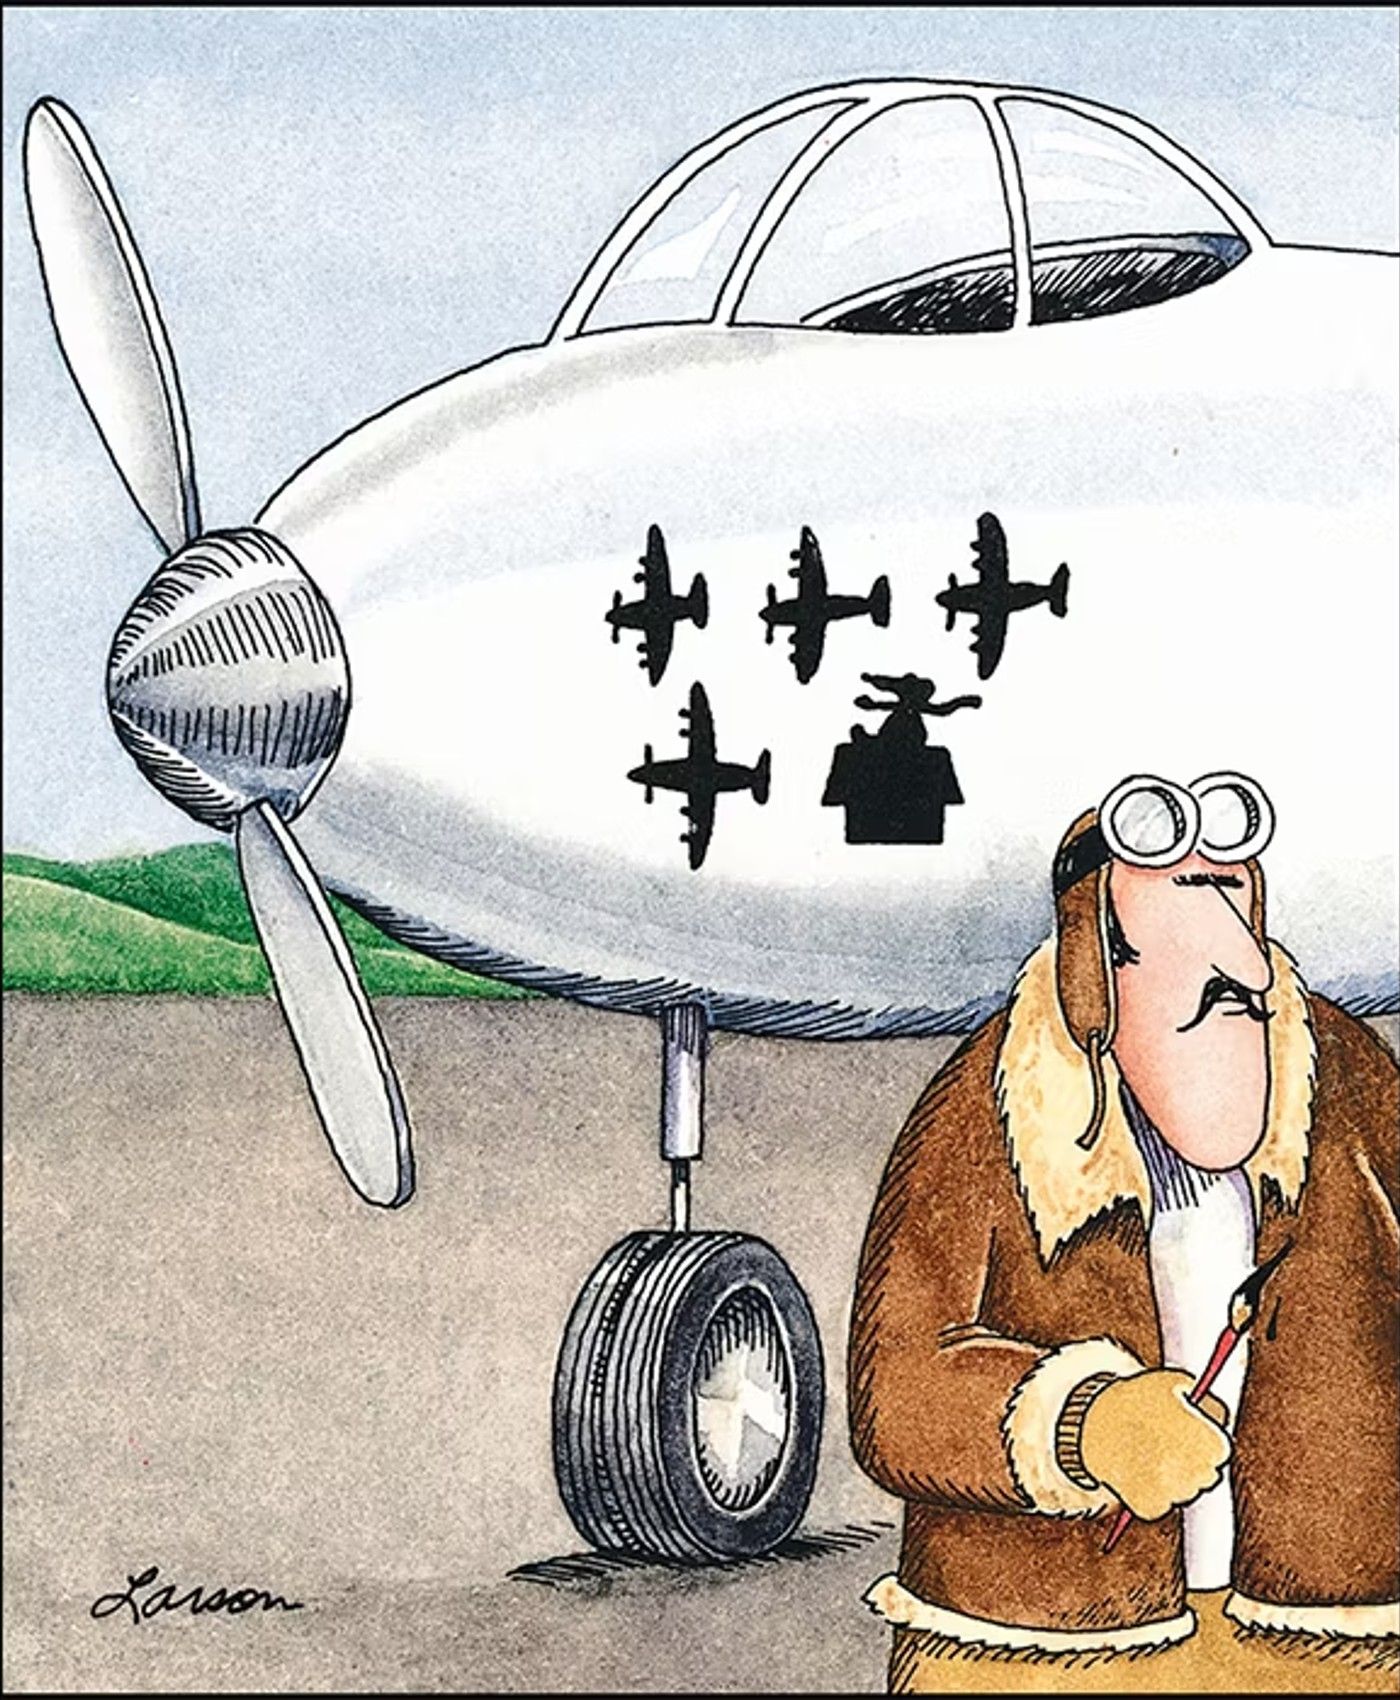 Far Side: The Red Baron, with his kills painted on his plane, Snoopy included